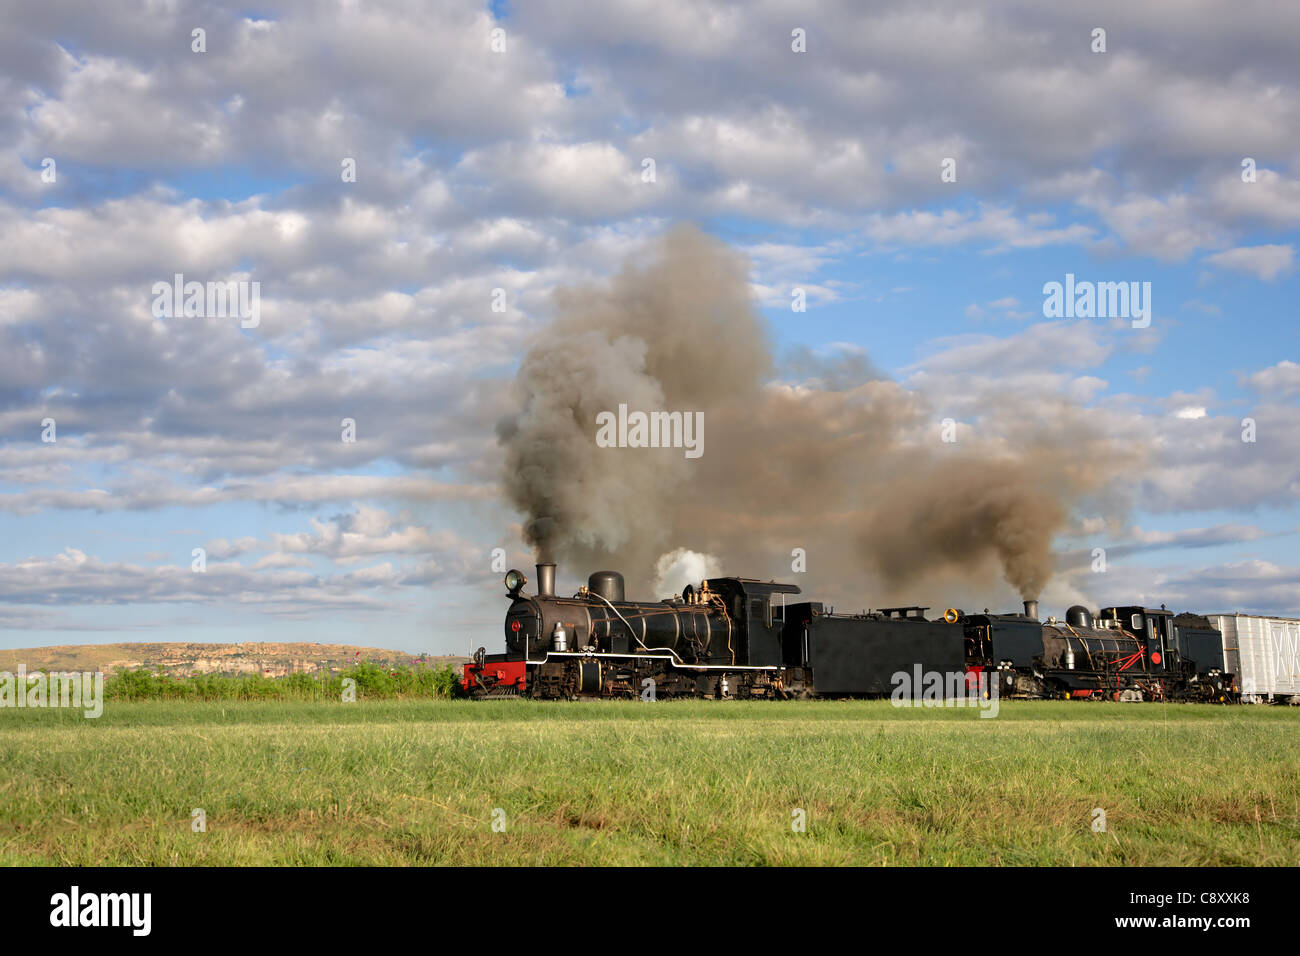 Vintage steam locomotive with billowing smoke and steam Stock Photo